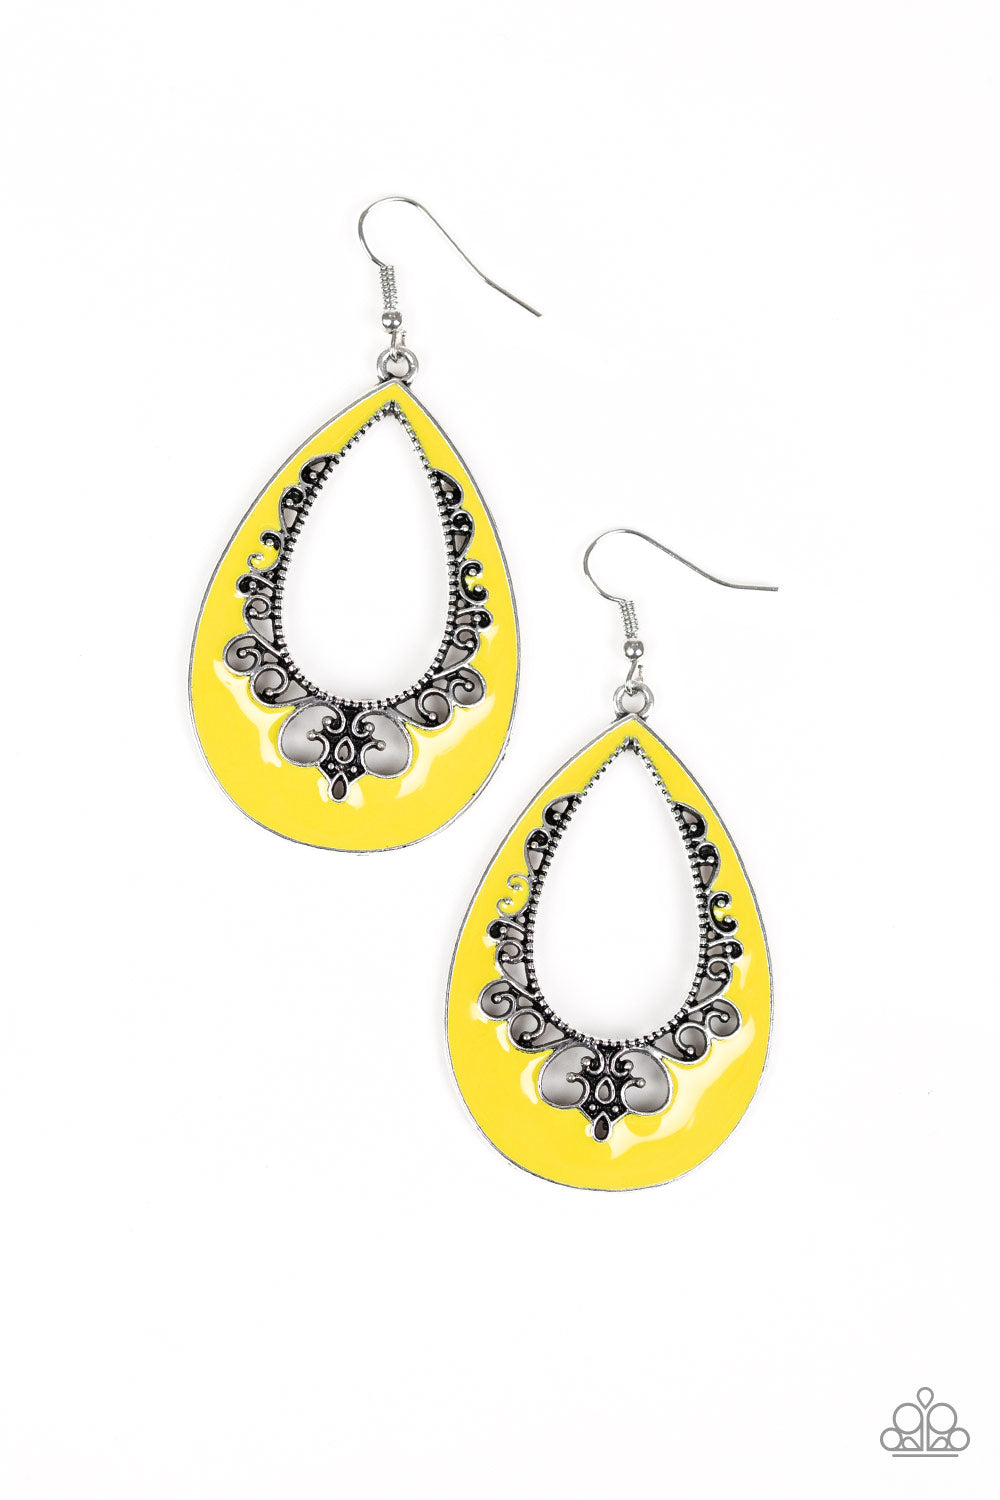 Compliments To The CHIC - Yellow Item #JJG-E302 Painted in a shiny yellow finish, an airy silver teardrop swings from the ear in a whimsical fashion. The colorful frame features cutout filigree patterns for a seasonal flair. Earring attaches to a standard fishhook fitting. All Paparazzi Accessories are lead free and nickel free!  Sold as one pair of earrings.